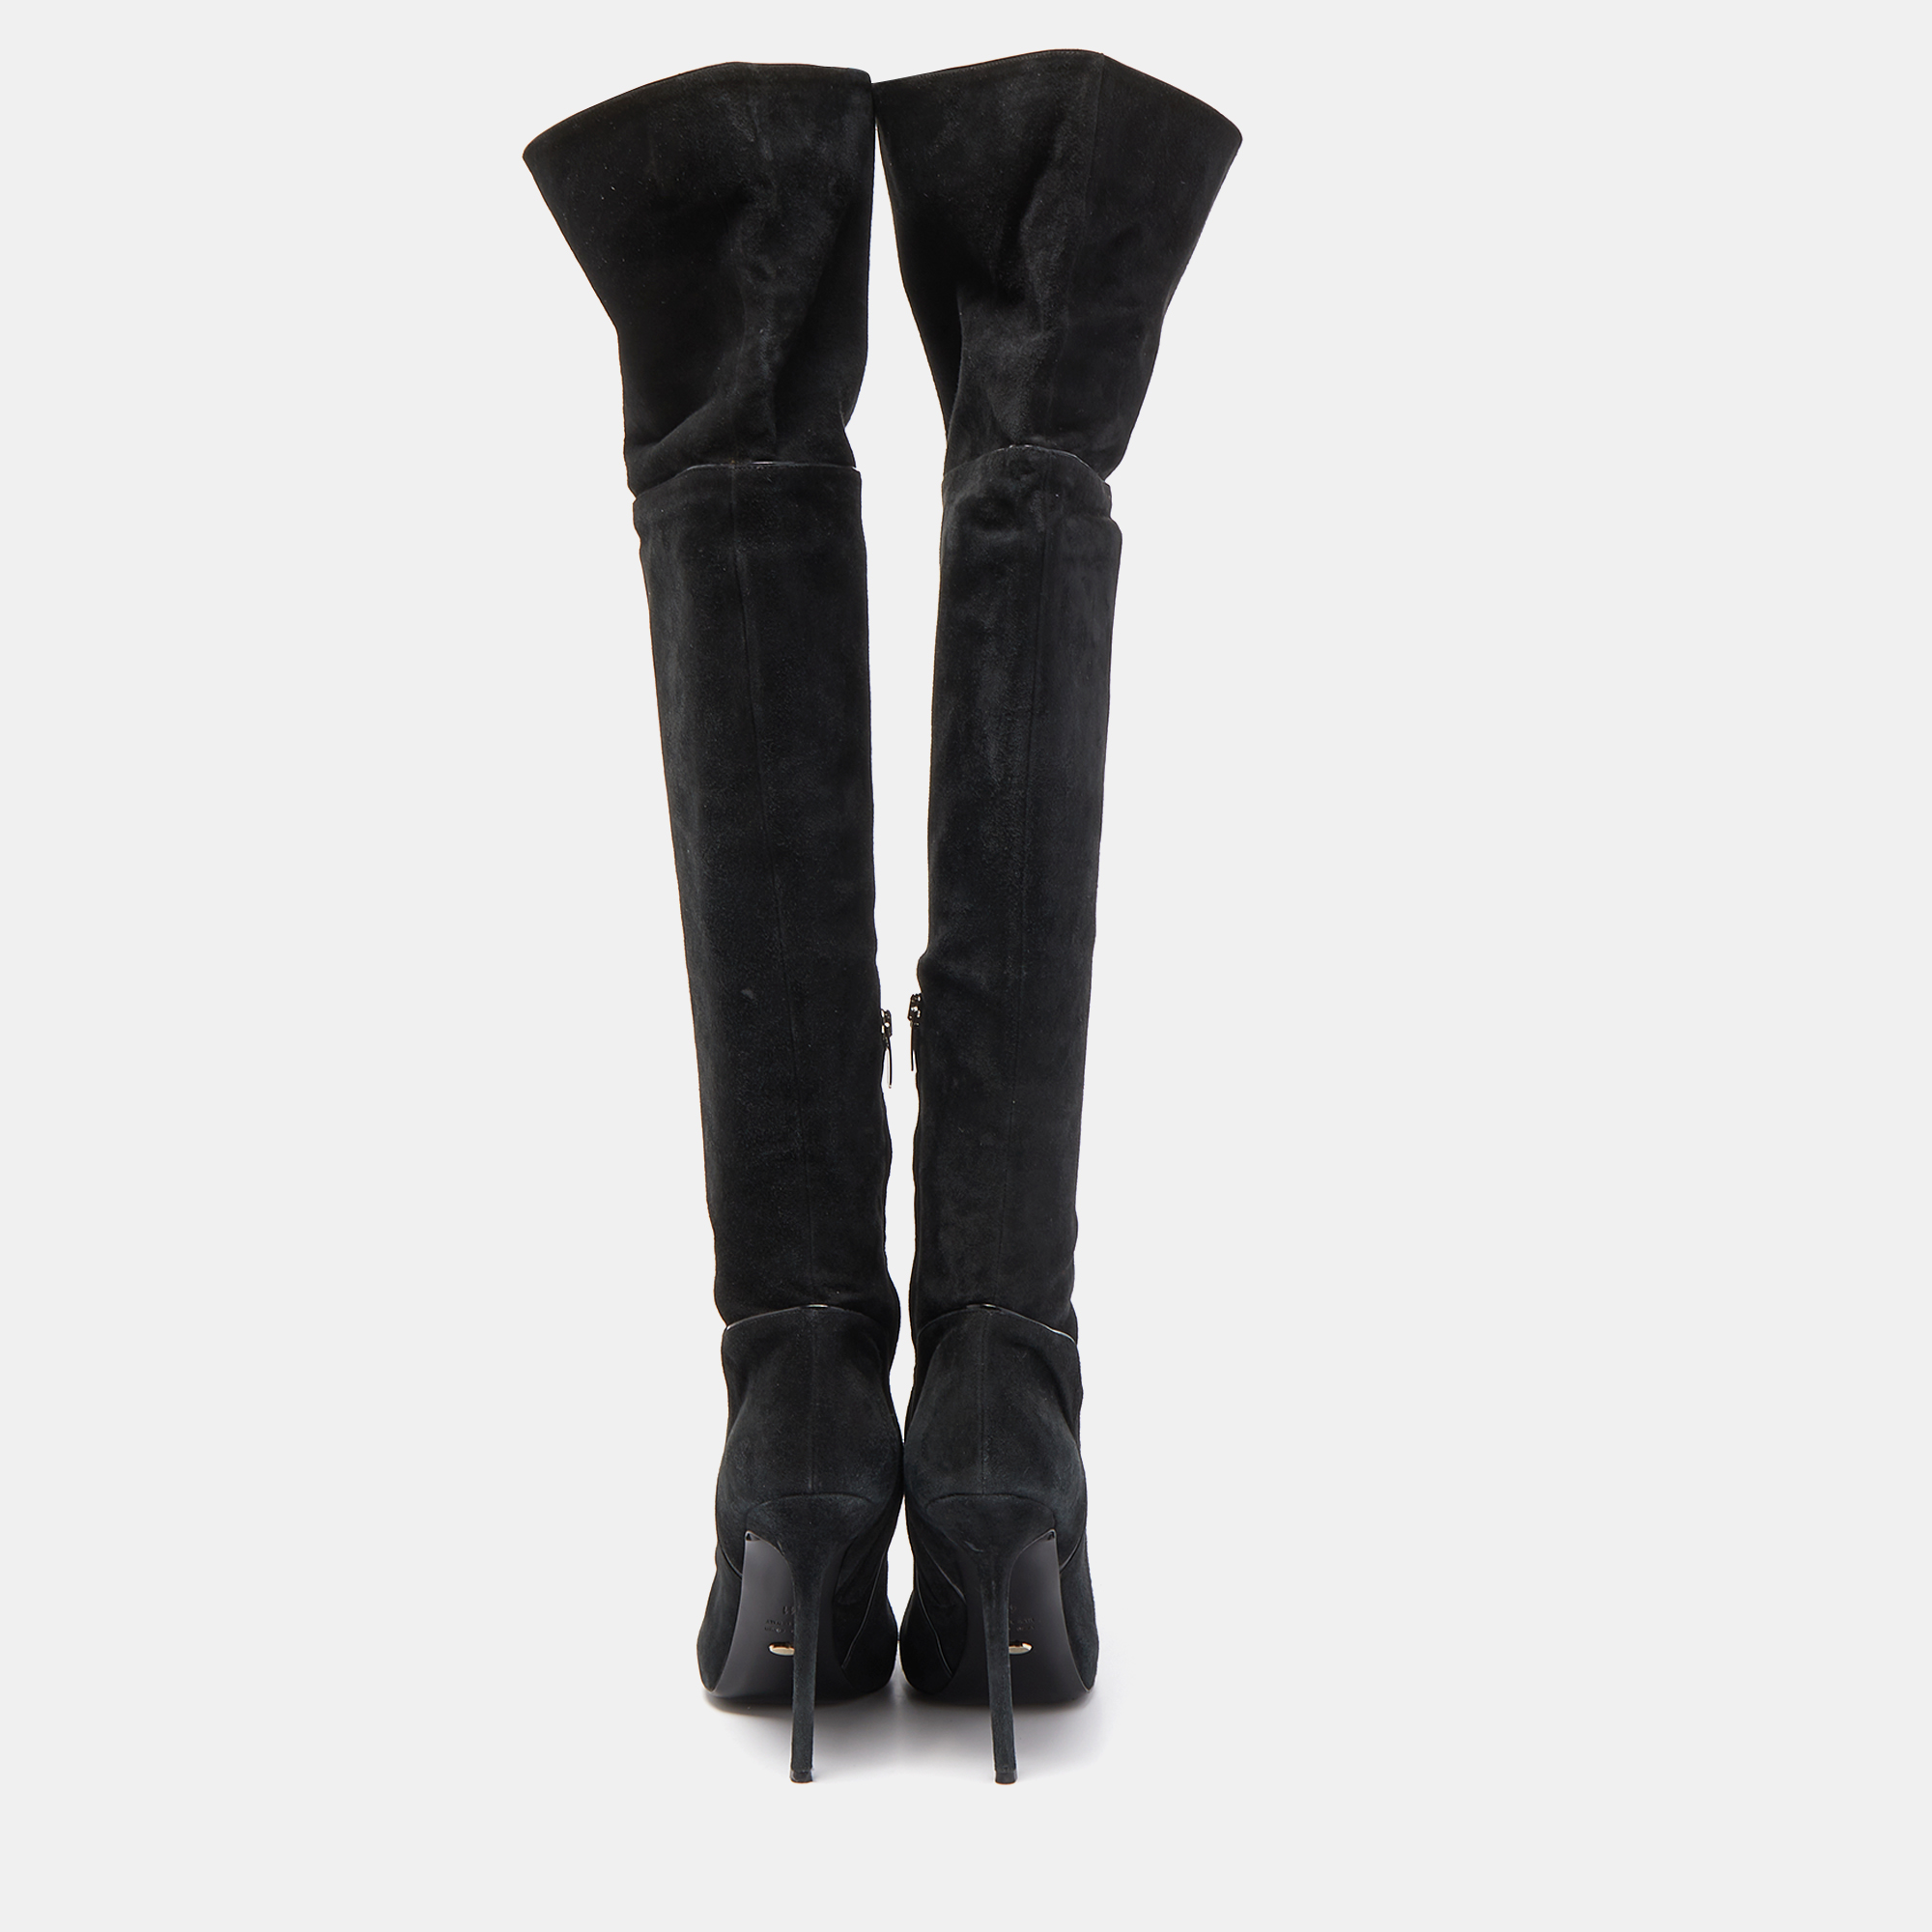 Sergio Rossi Black Suede Knee Length Boots Size 41